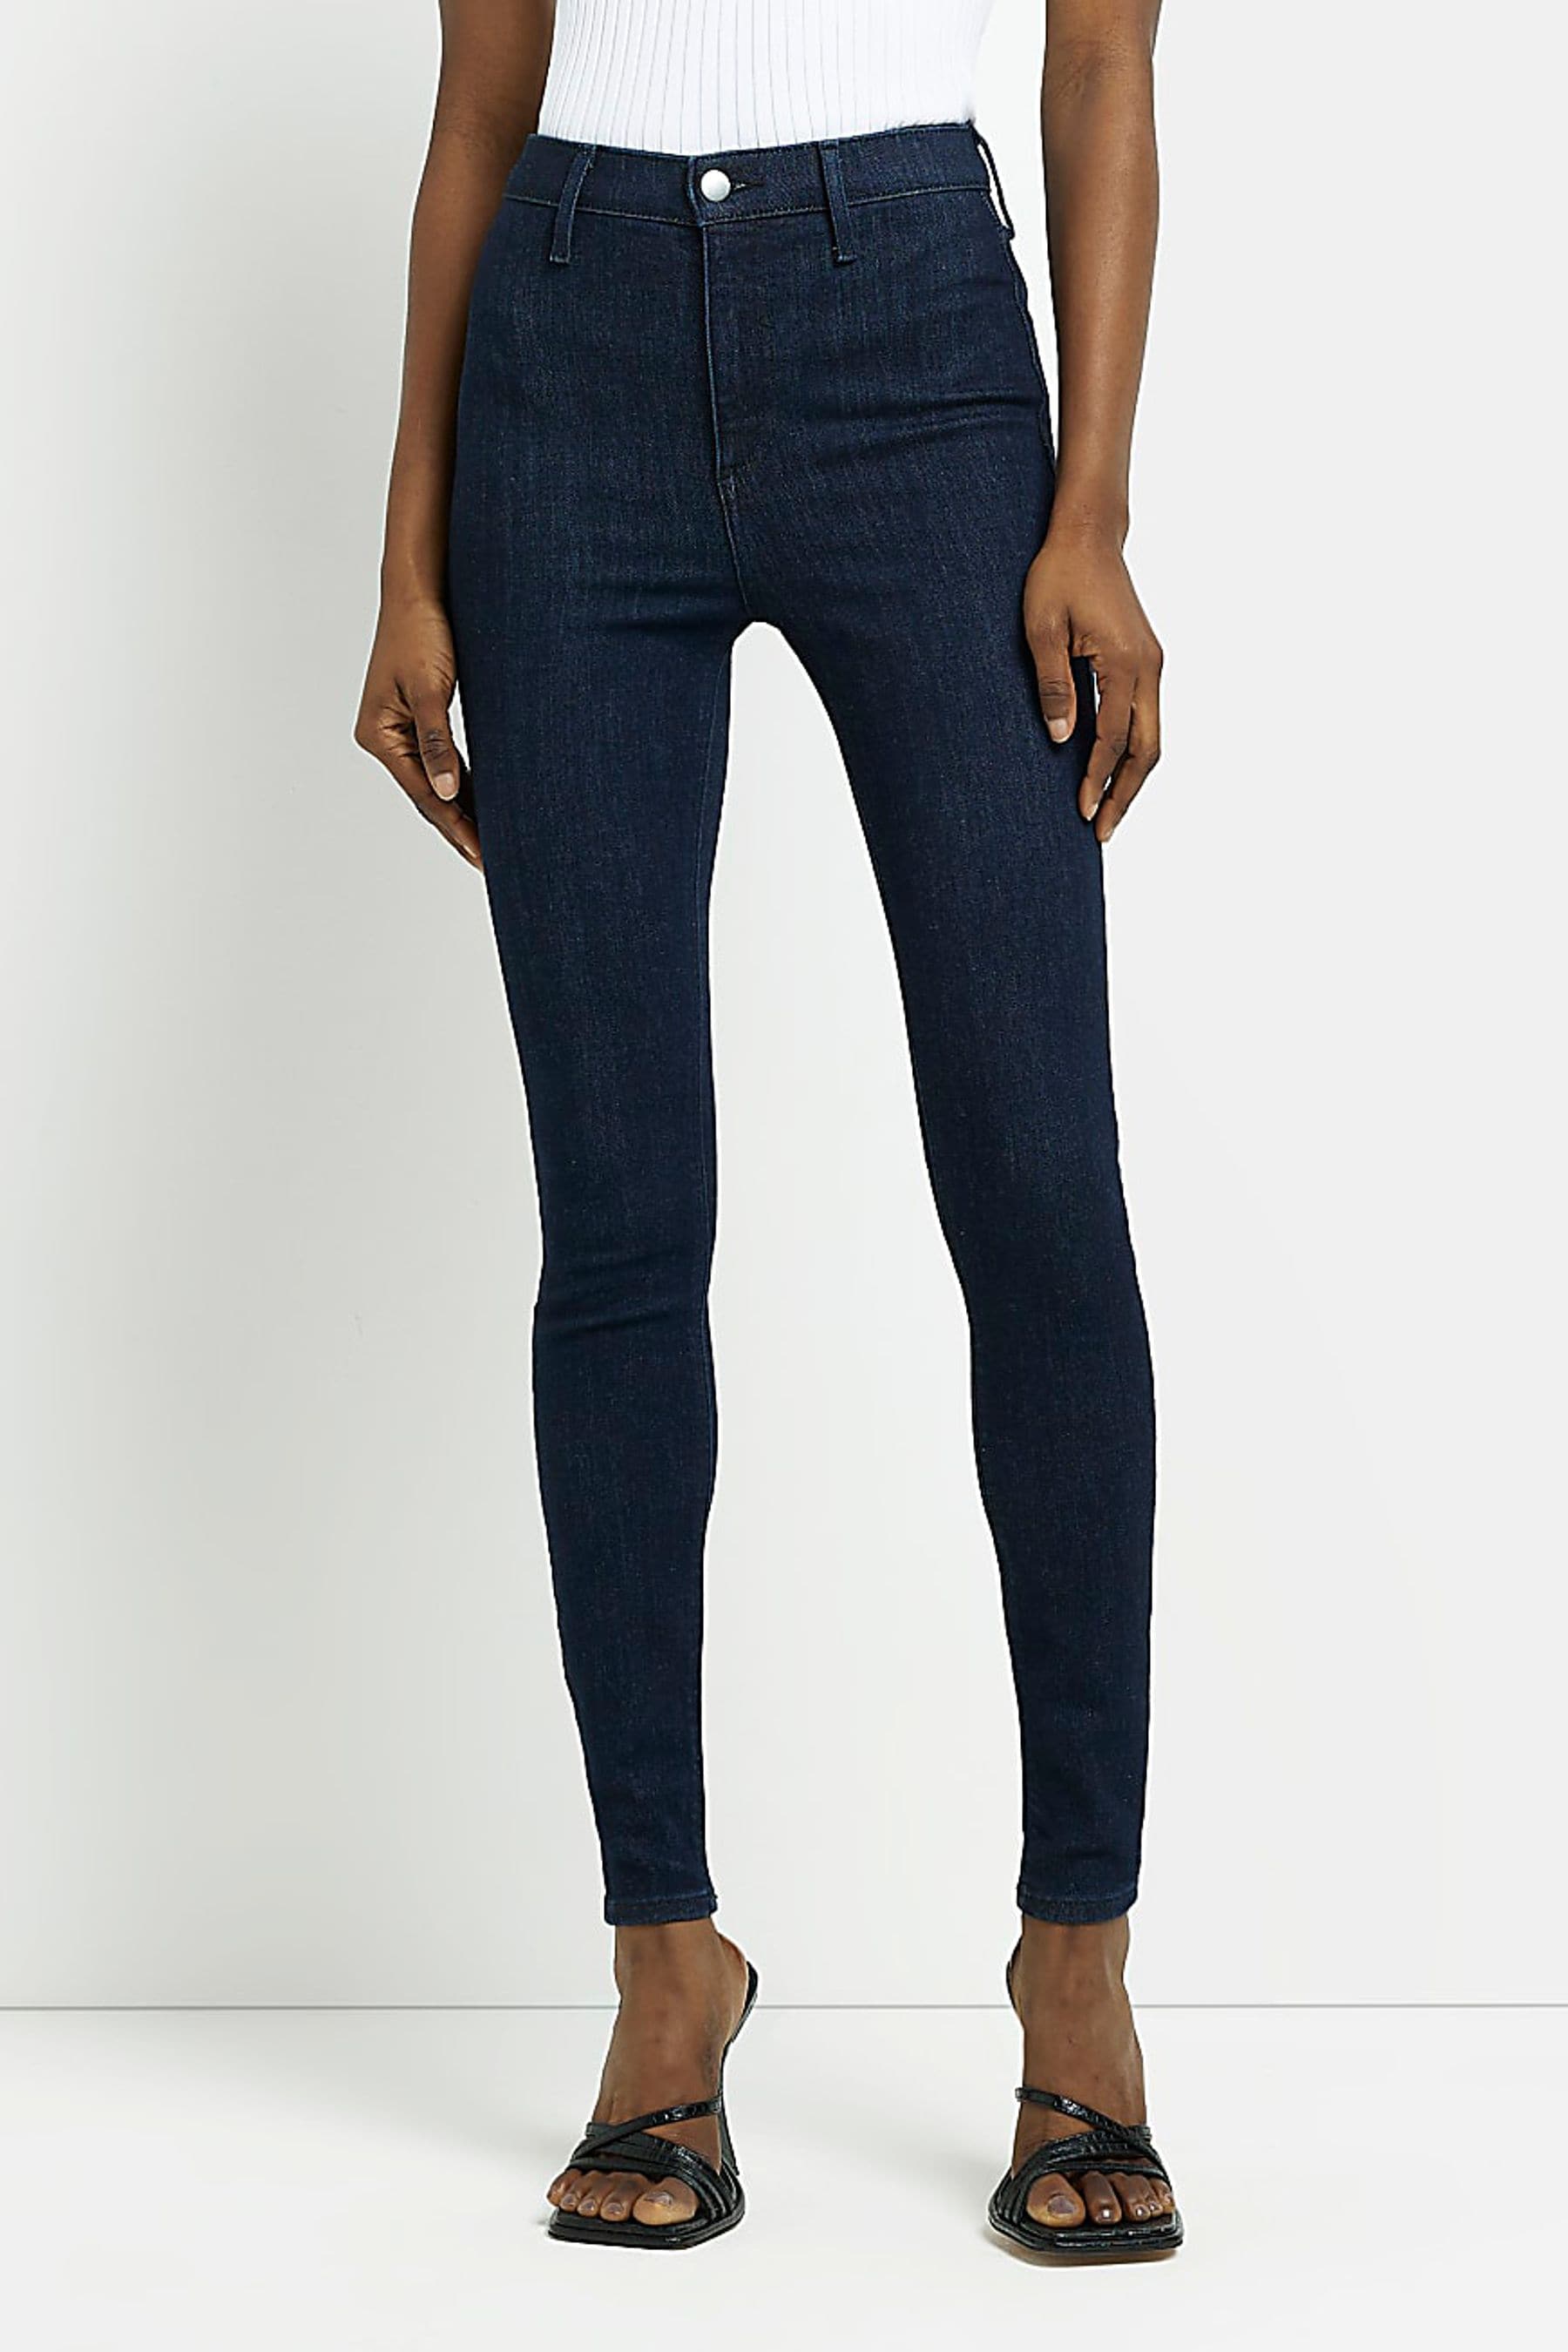 Buy River Island Blue High Rise Skinny Jeans from the Next UK online shop